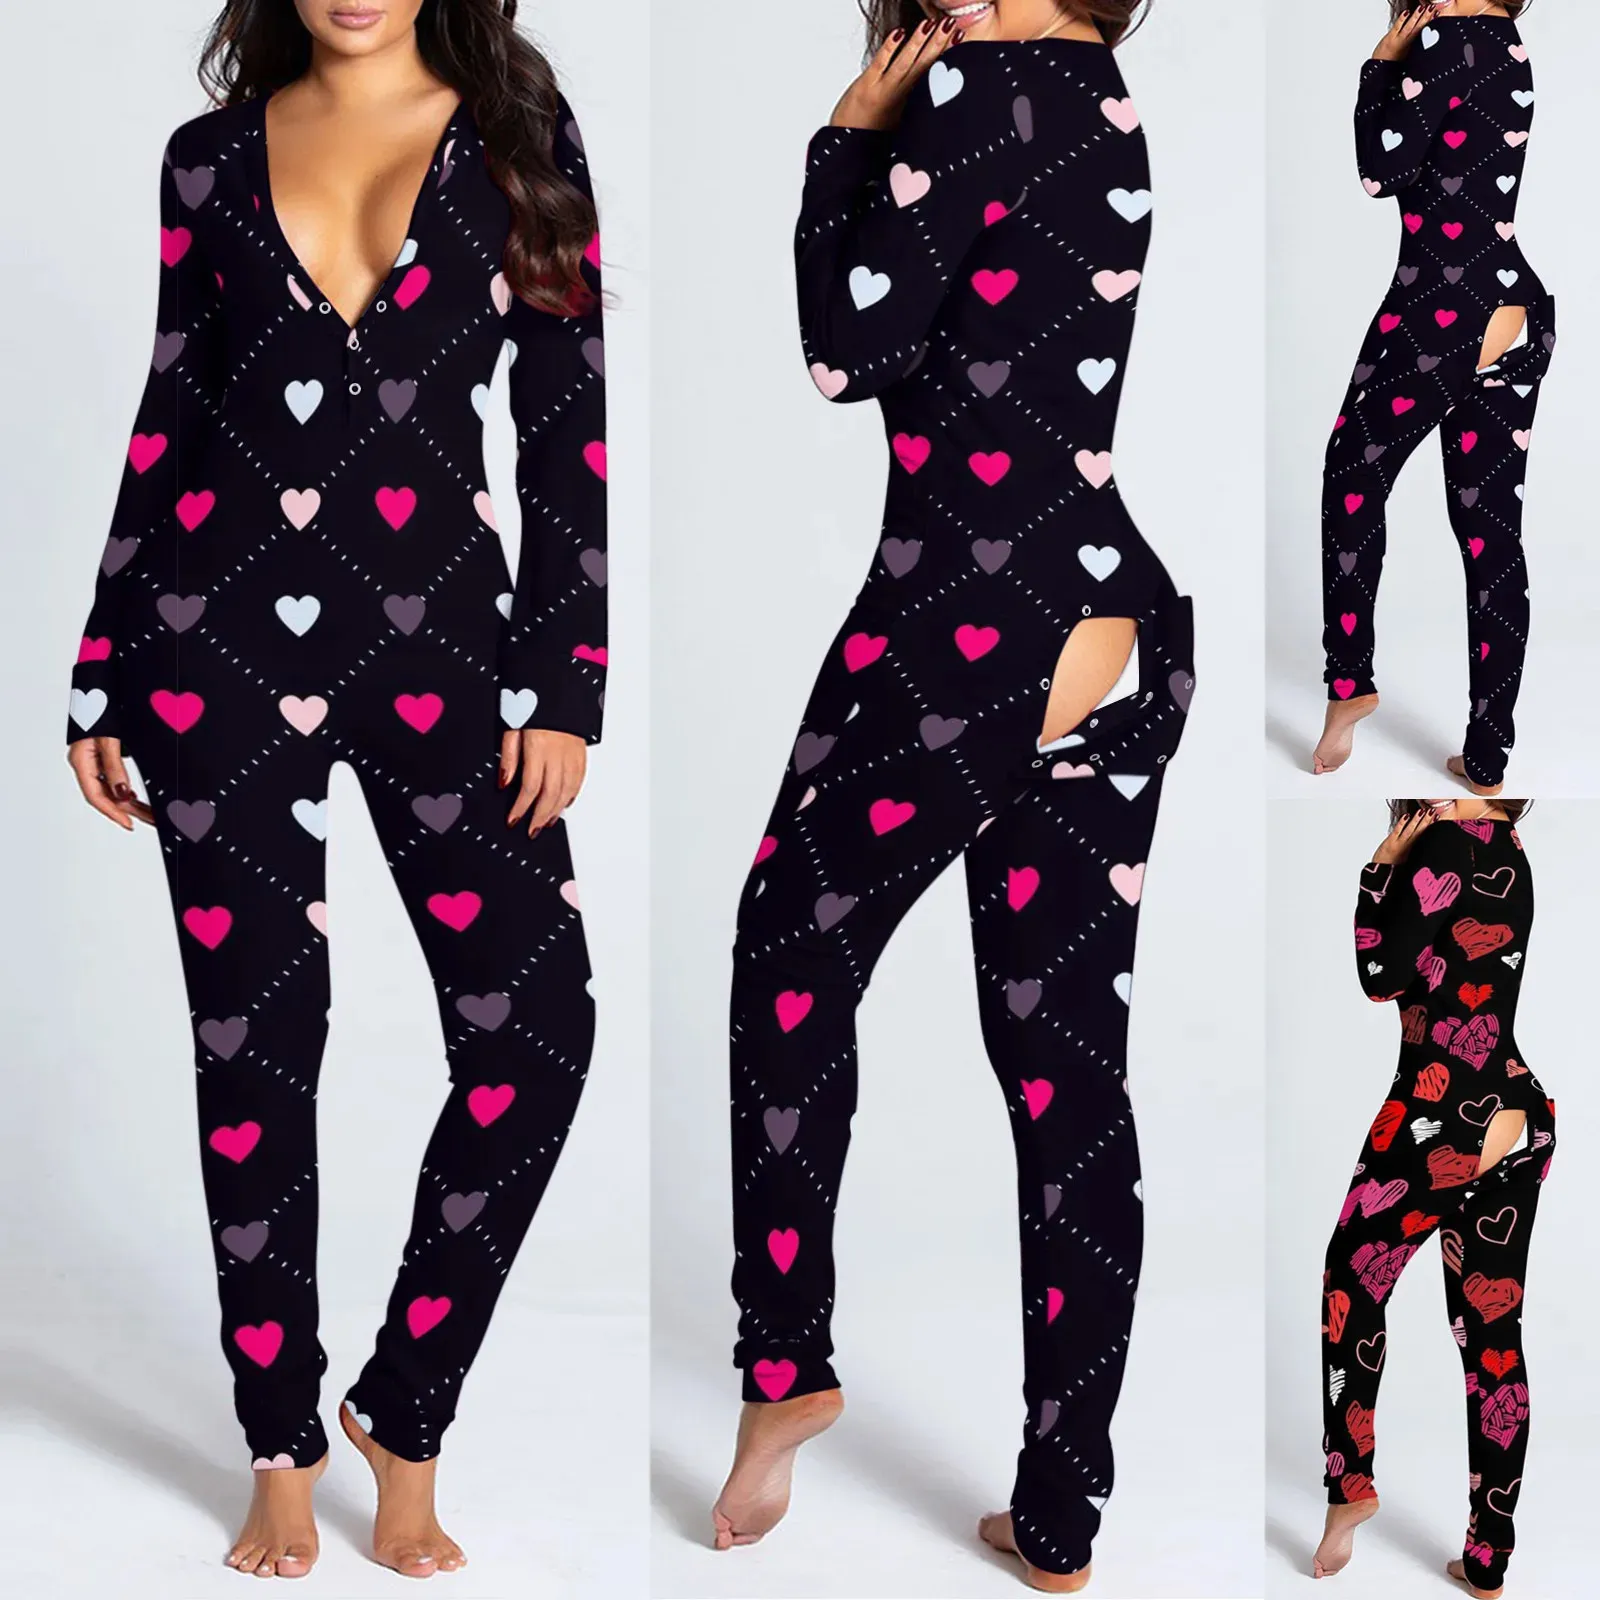 Women's Jumpsuits Rompers Sexy Pajama for Women Year Jumpsuit Button-down Front Back Butt Bum Open Ass Flap Jumpsuit Valentine's Day Print Loungewear 231130